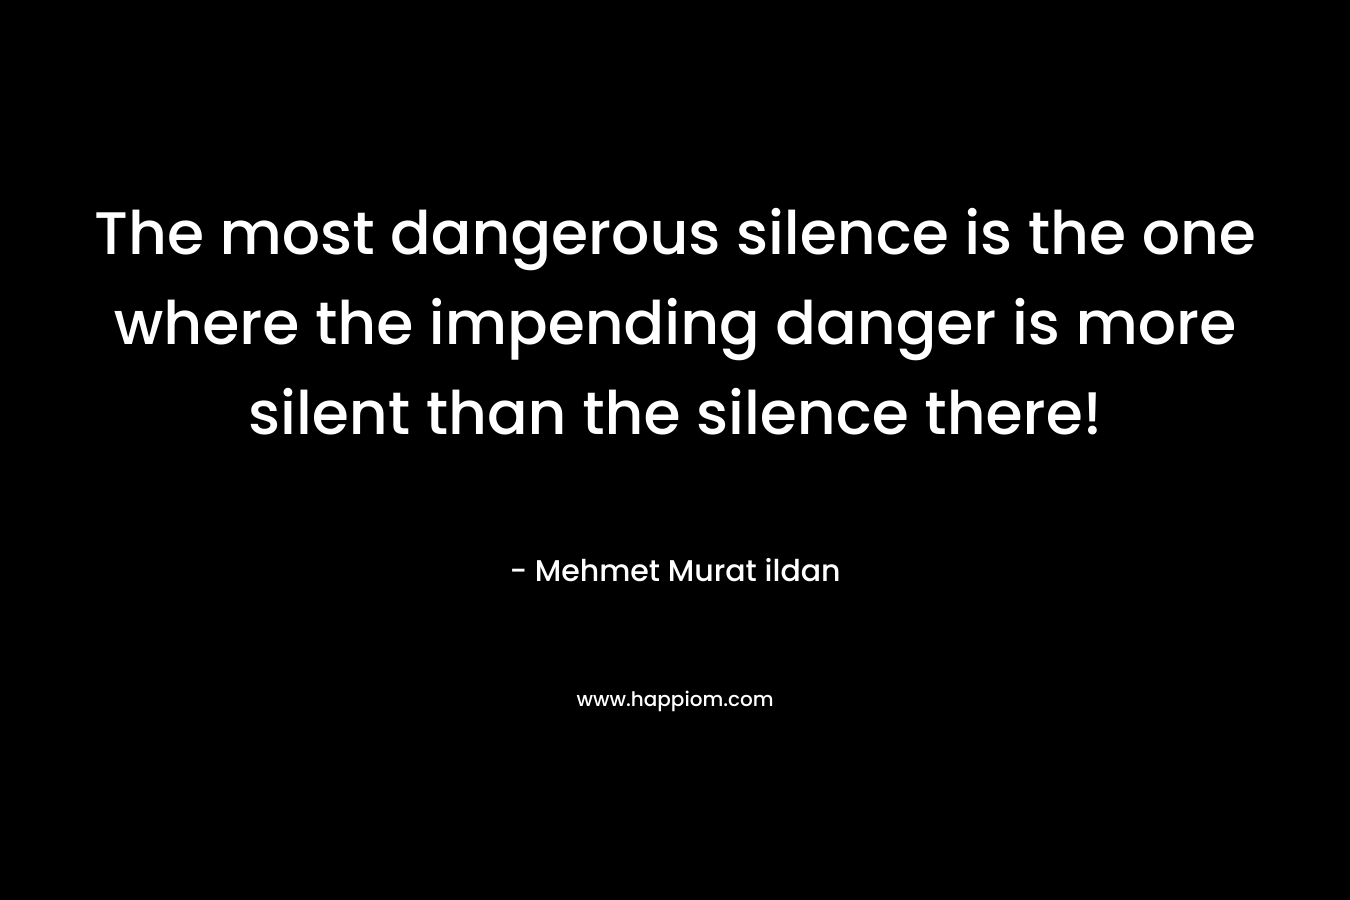 The most dangerous silence is the one where the impending danger is more silent than the silence there!